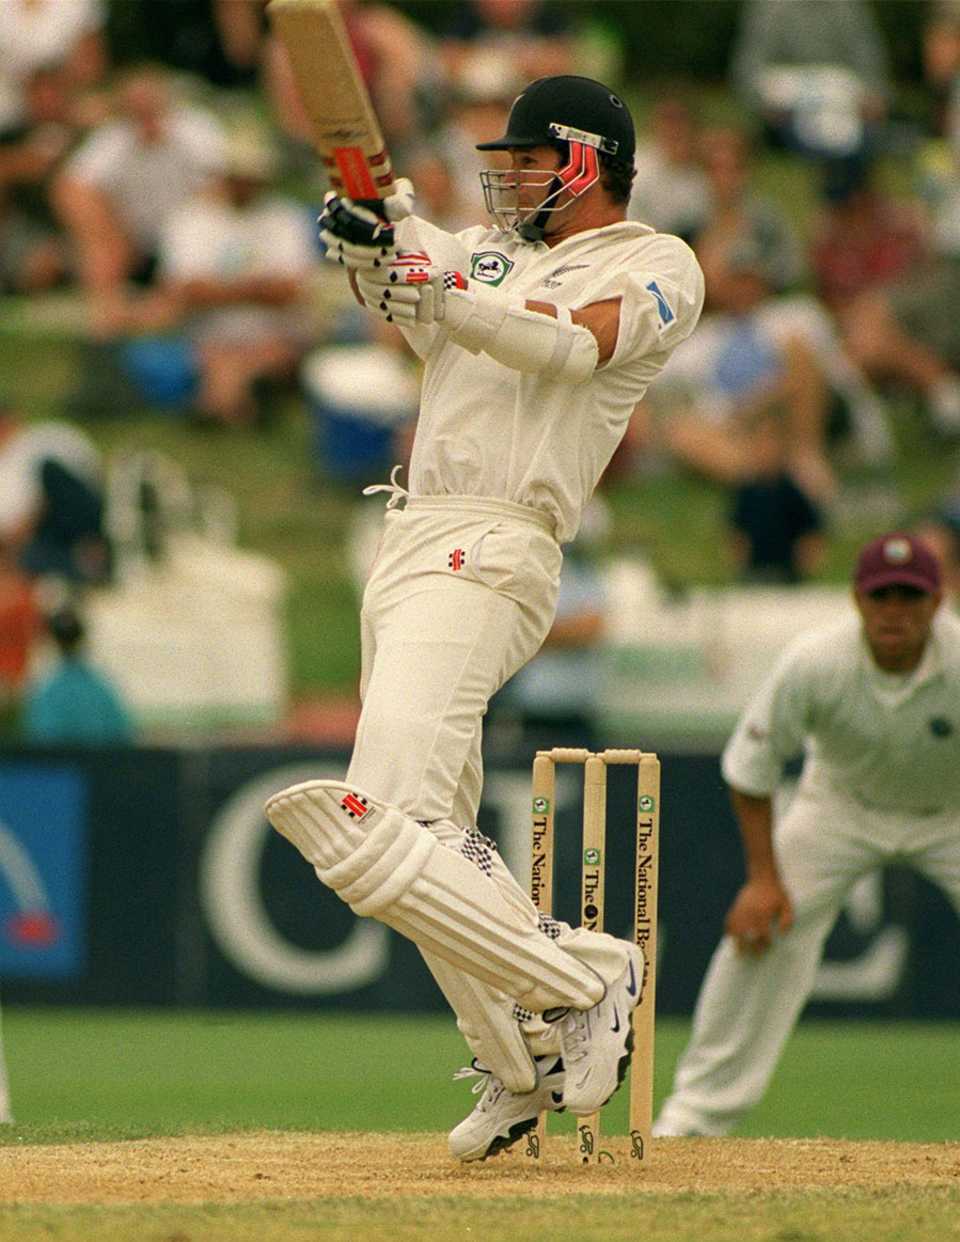 Chris Cairns cuts on his way to 72, New Zealand v West Indies, 1st Test, Hamilton, 3rd day, December 18, 1999